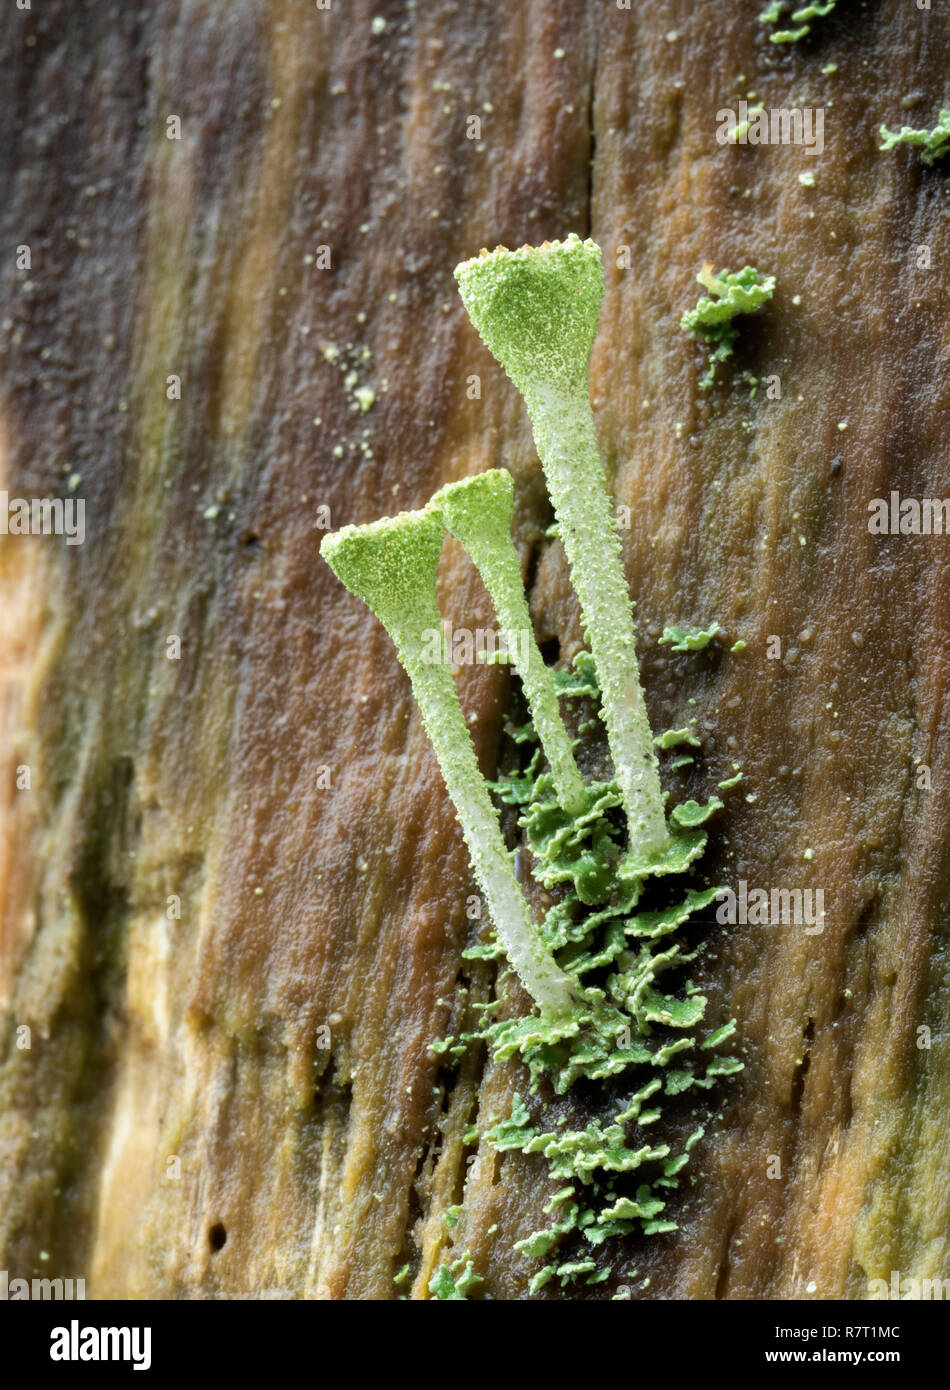 Lichen (Cladonia sp) growing on side of rotting tree trunk. Tipperary, Ireland Stock Photo